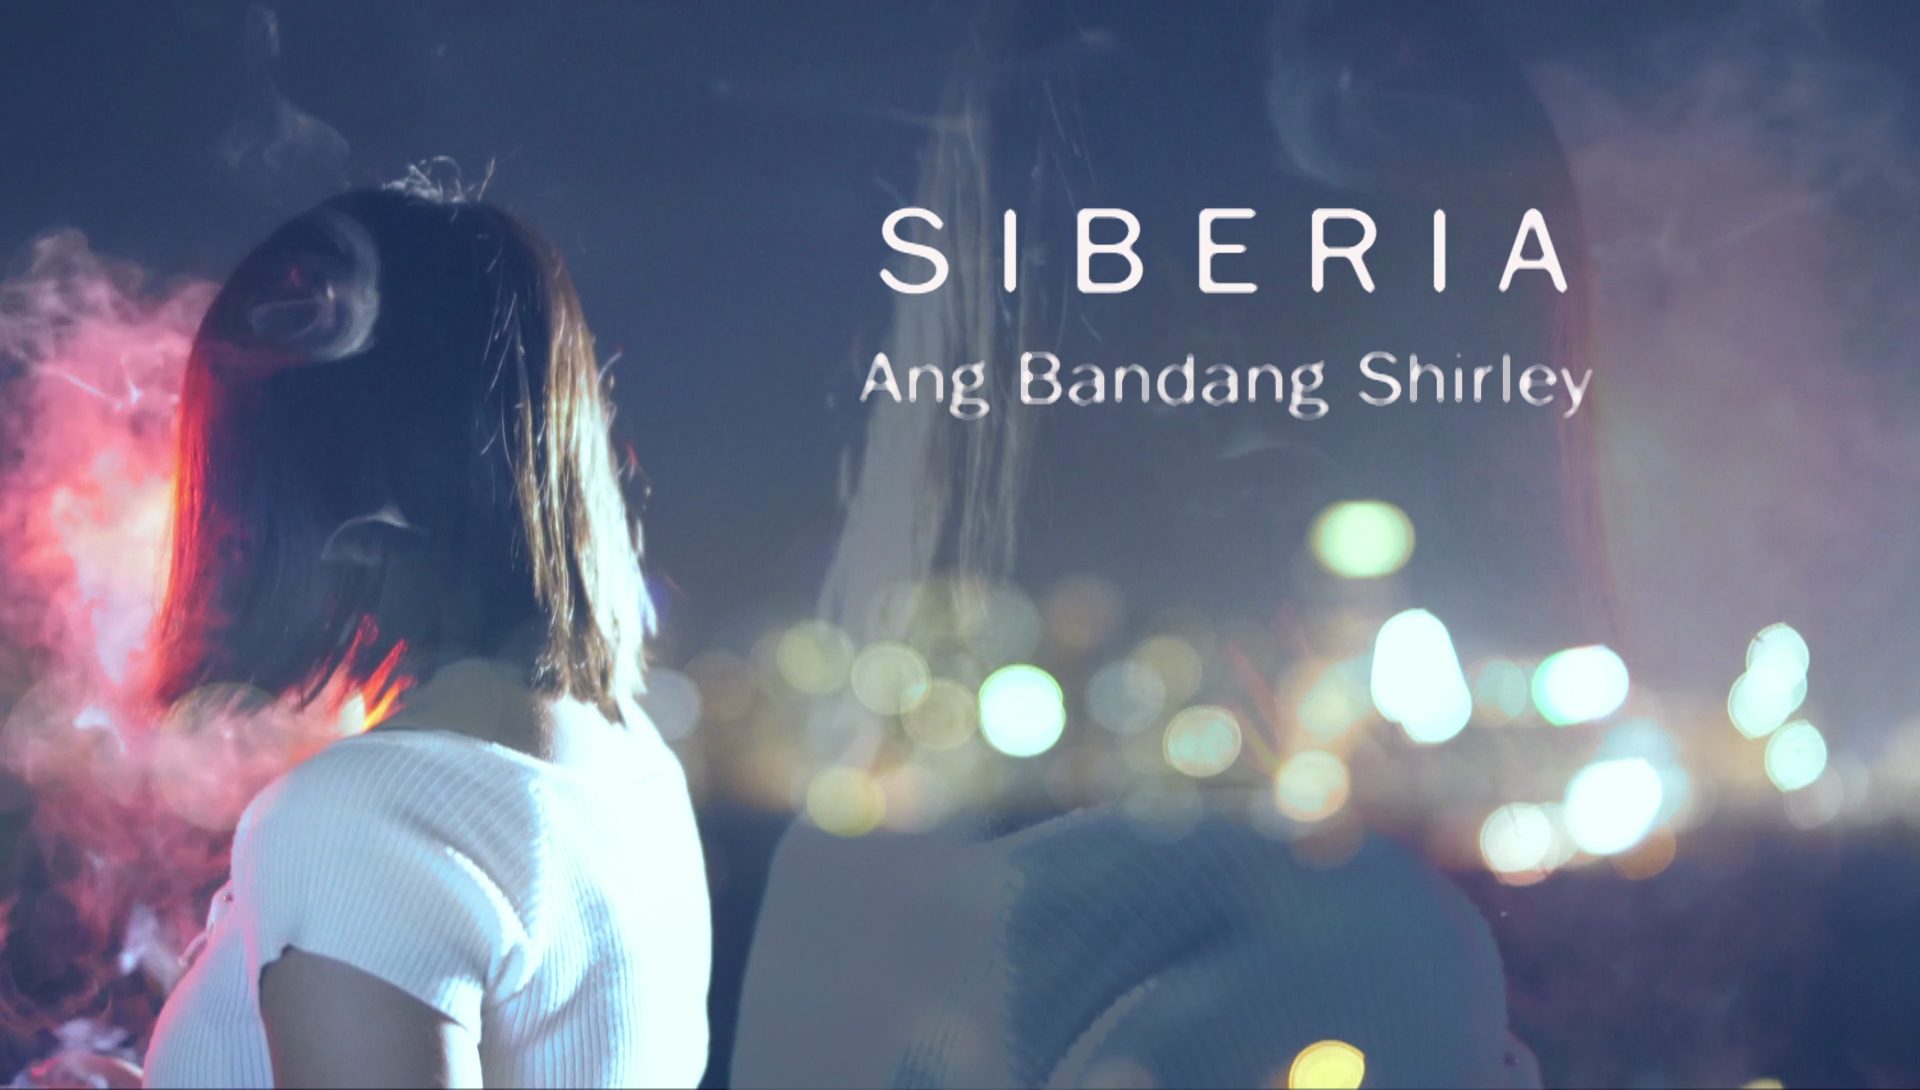 WATCH: ‘Siberia,’ the latest from Ang Bandang Shirley, is what you need to hear today